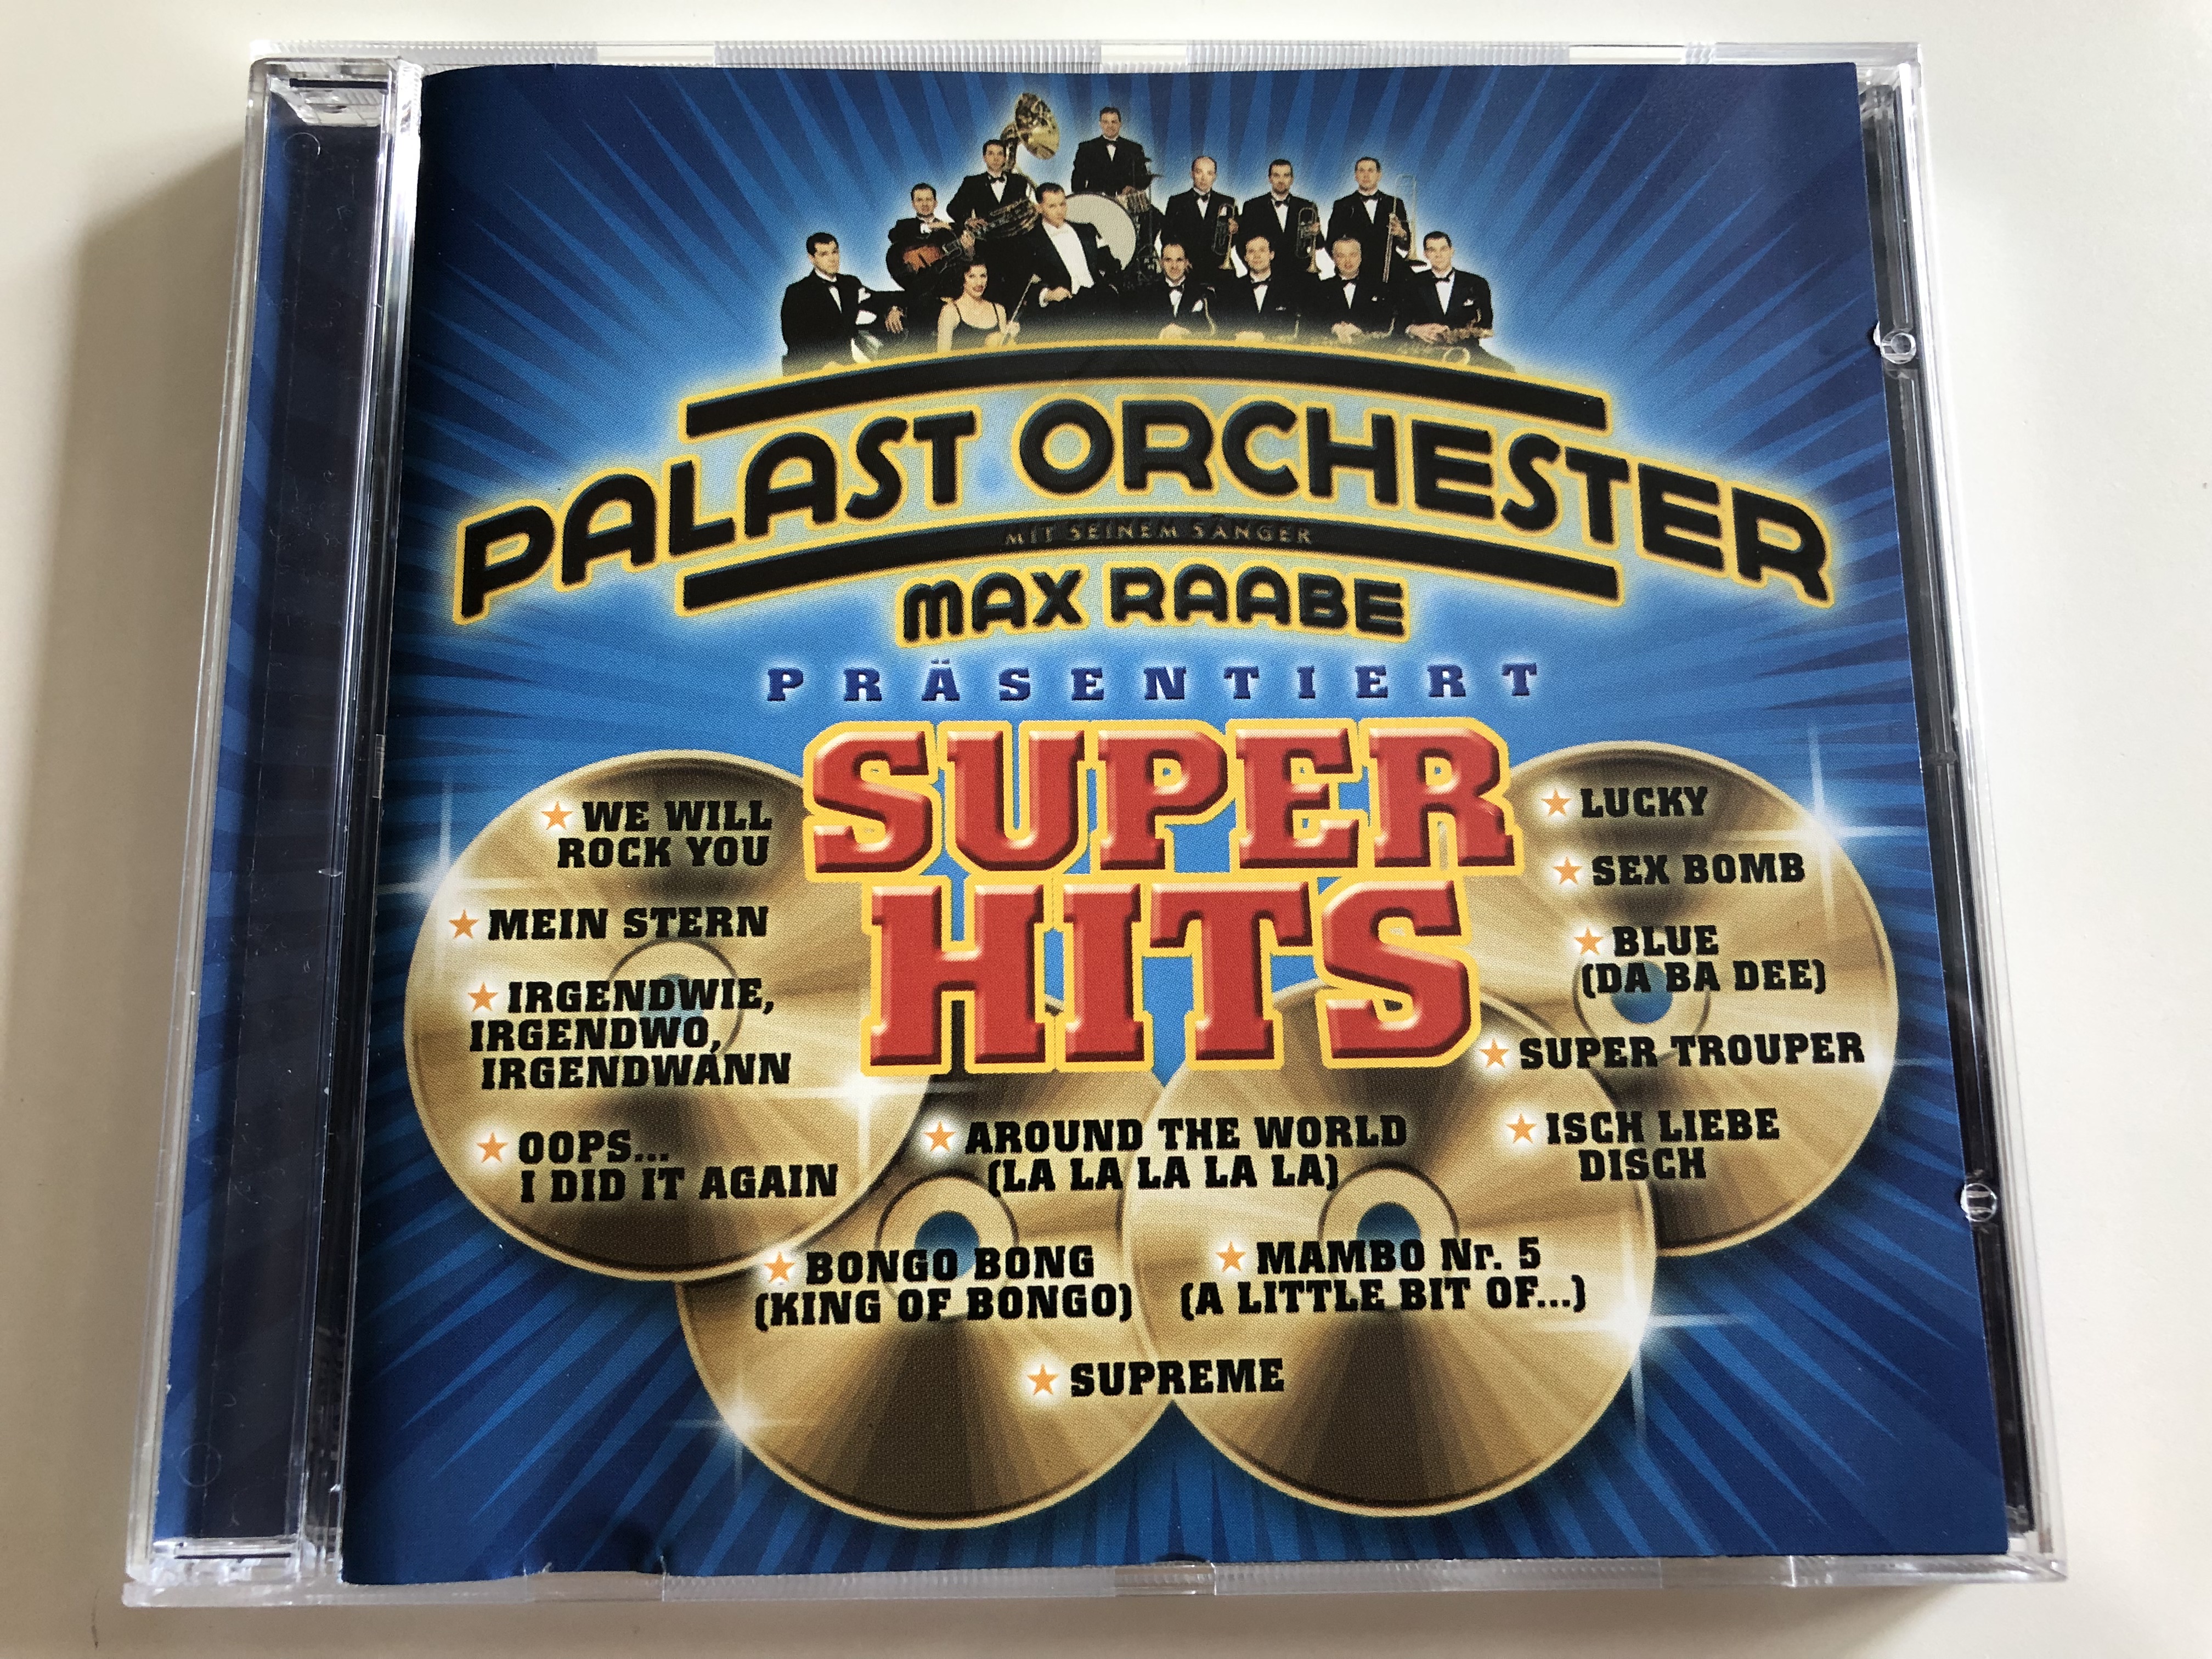 Palast Orchester - Super Hits / Max Raabe / We Will Rock You, Mein Stern,  Lucky, Mambo Nr. 5, Supreme / Audio CD 2001 - bibleinmylanguage